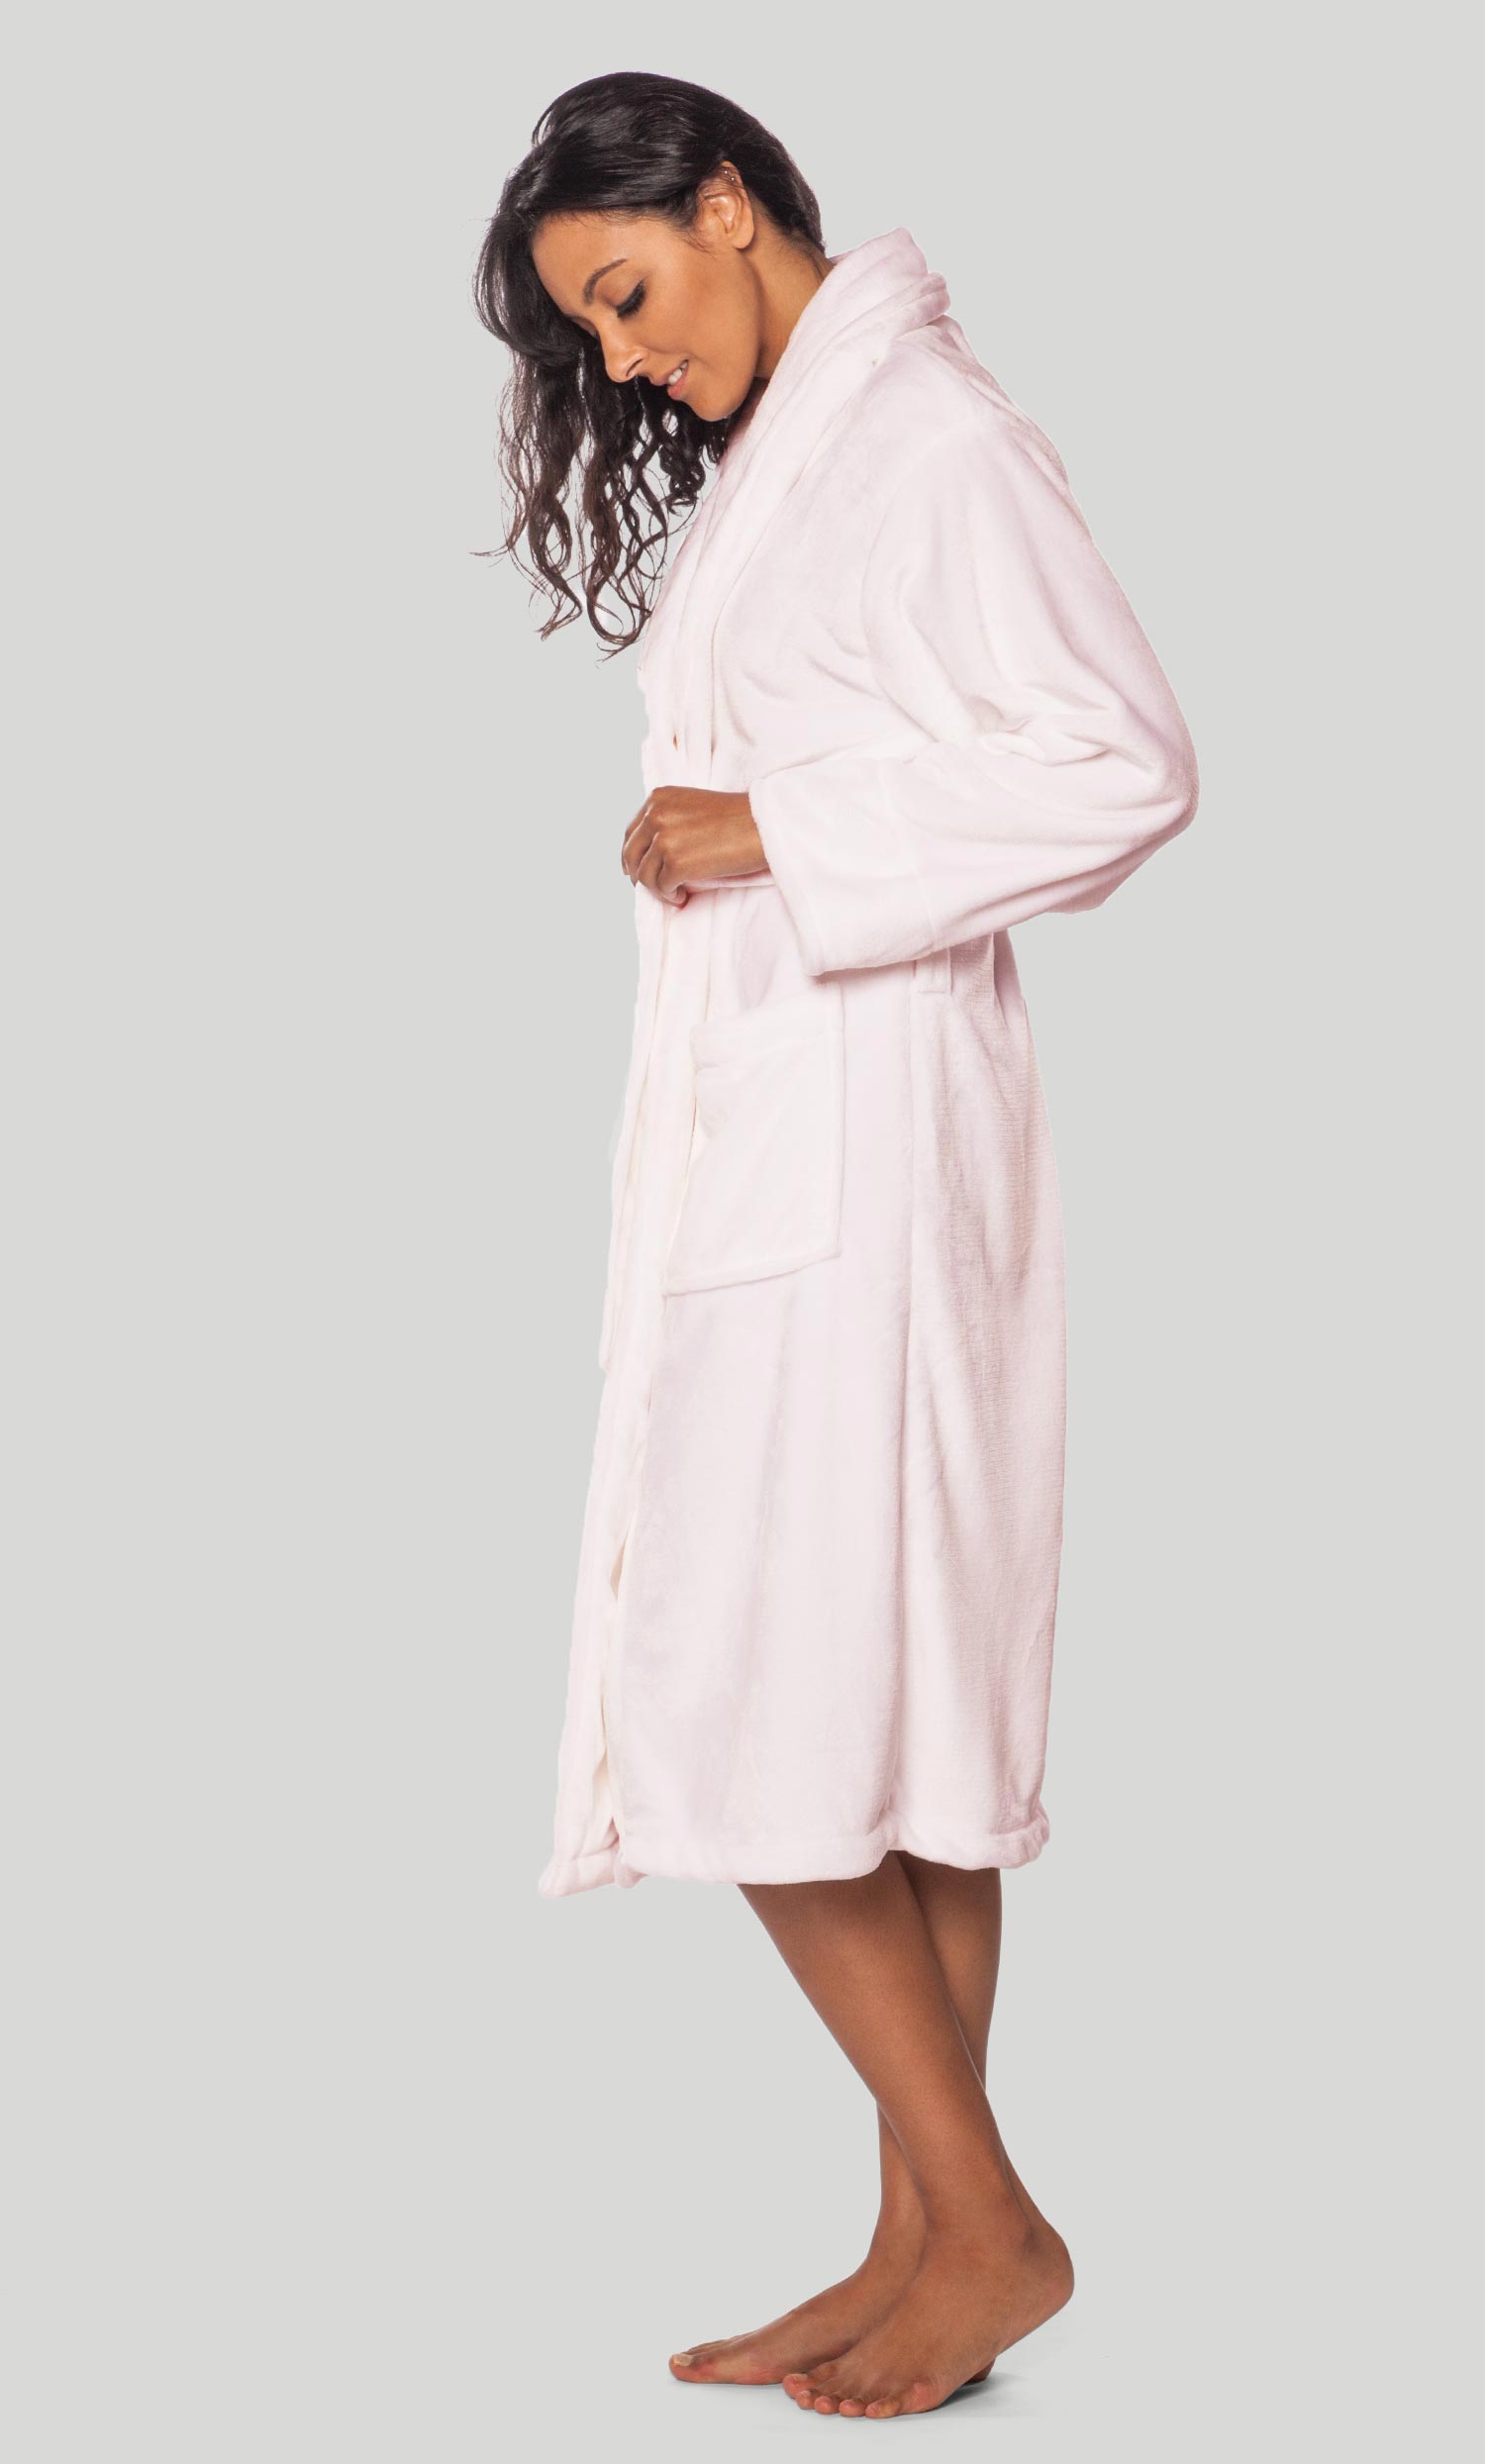 Luxury Bathrobes And Robes Plush Robes Light Pink Super Soft Tahoe Microfleece Shawl Collar